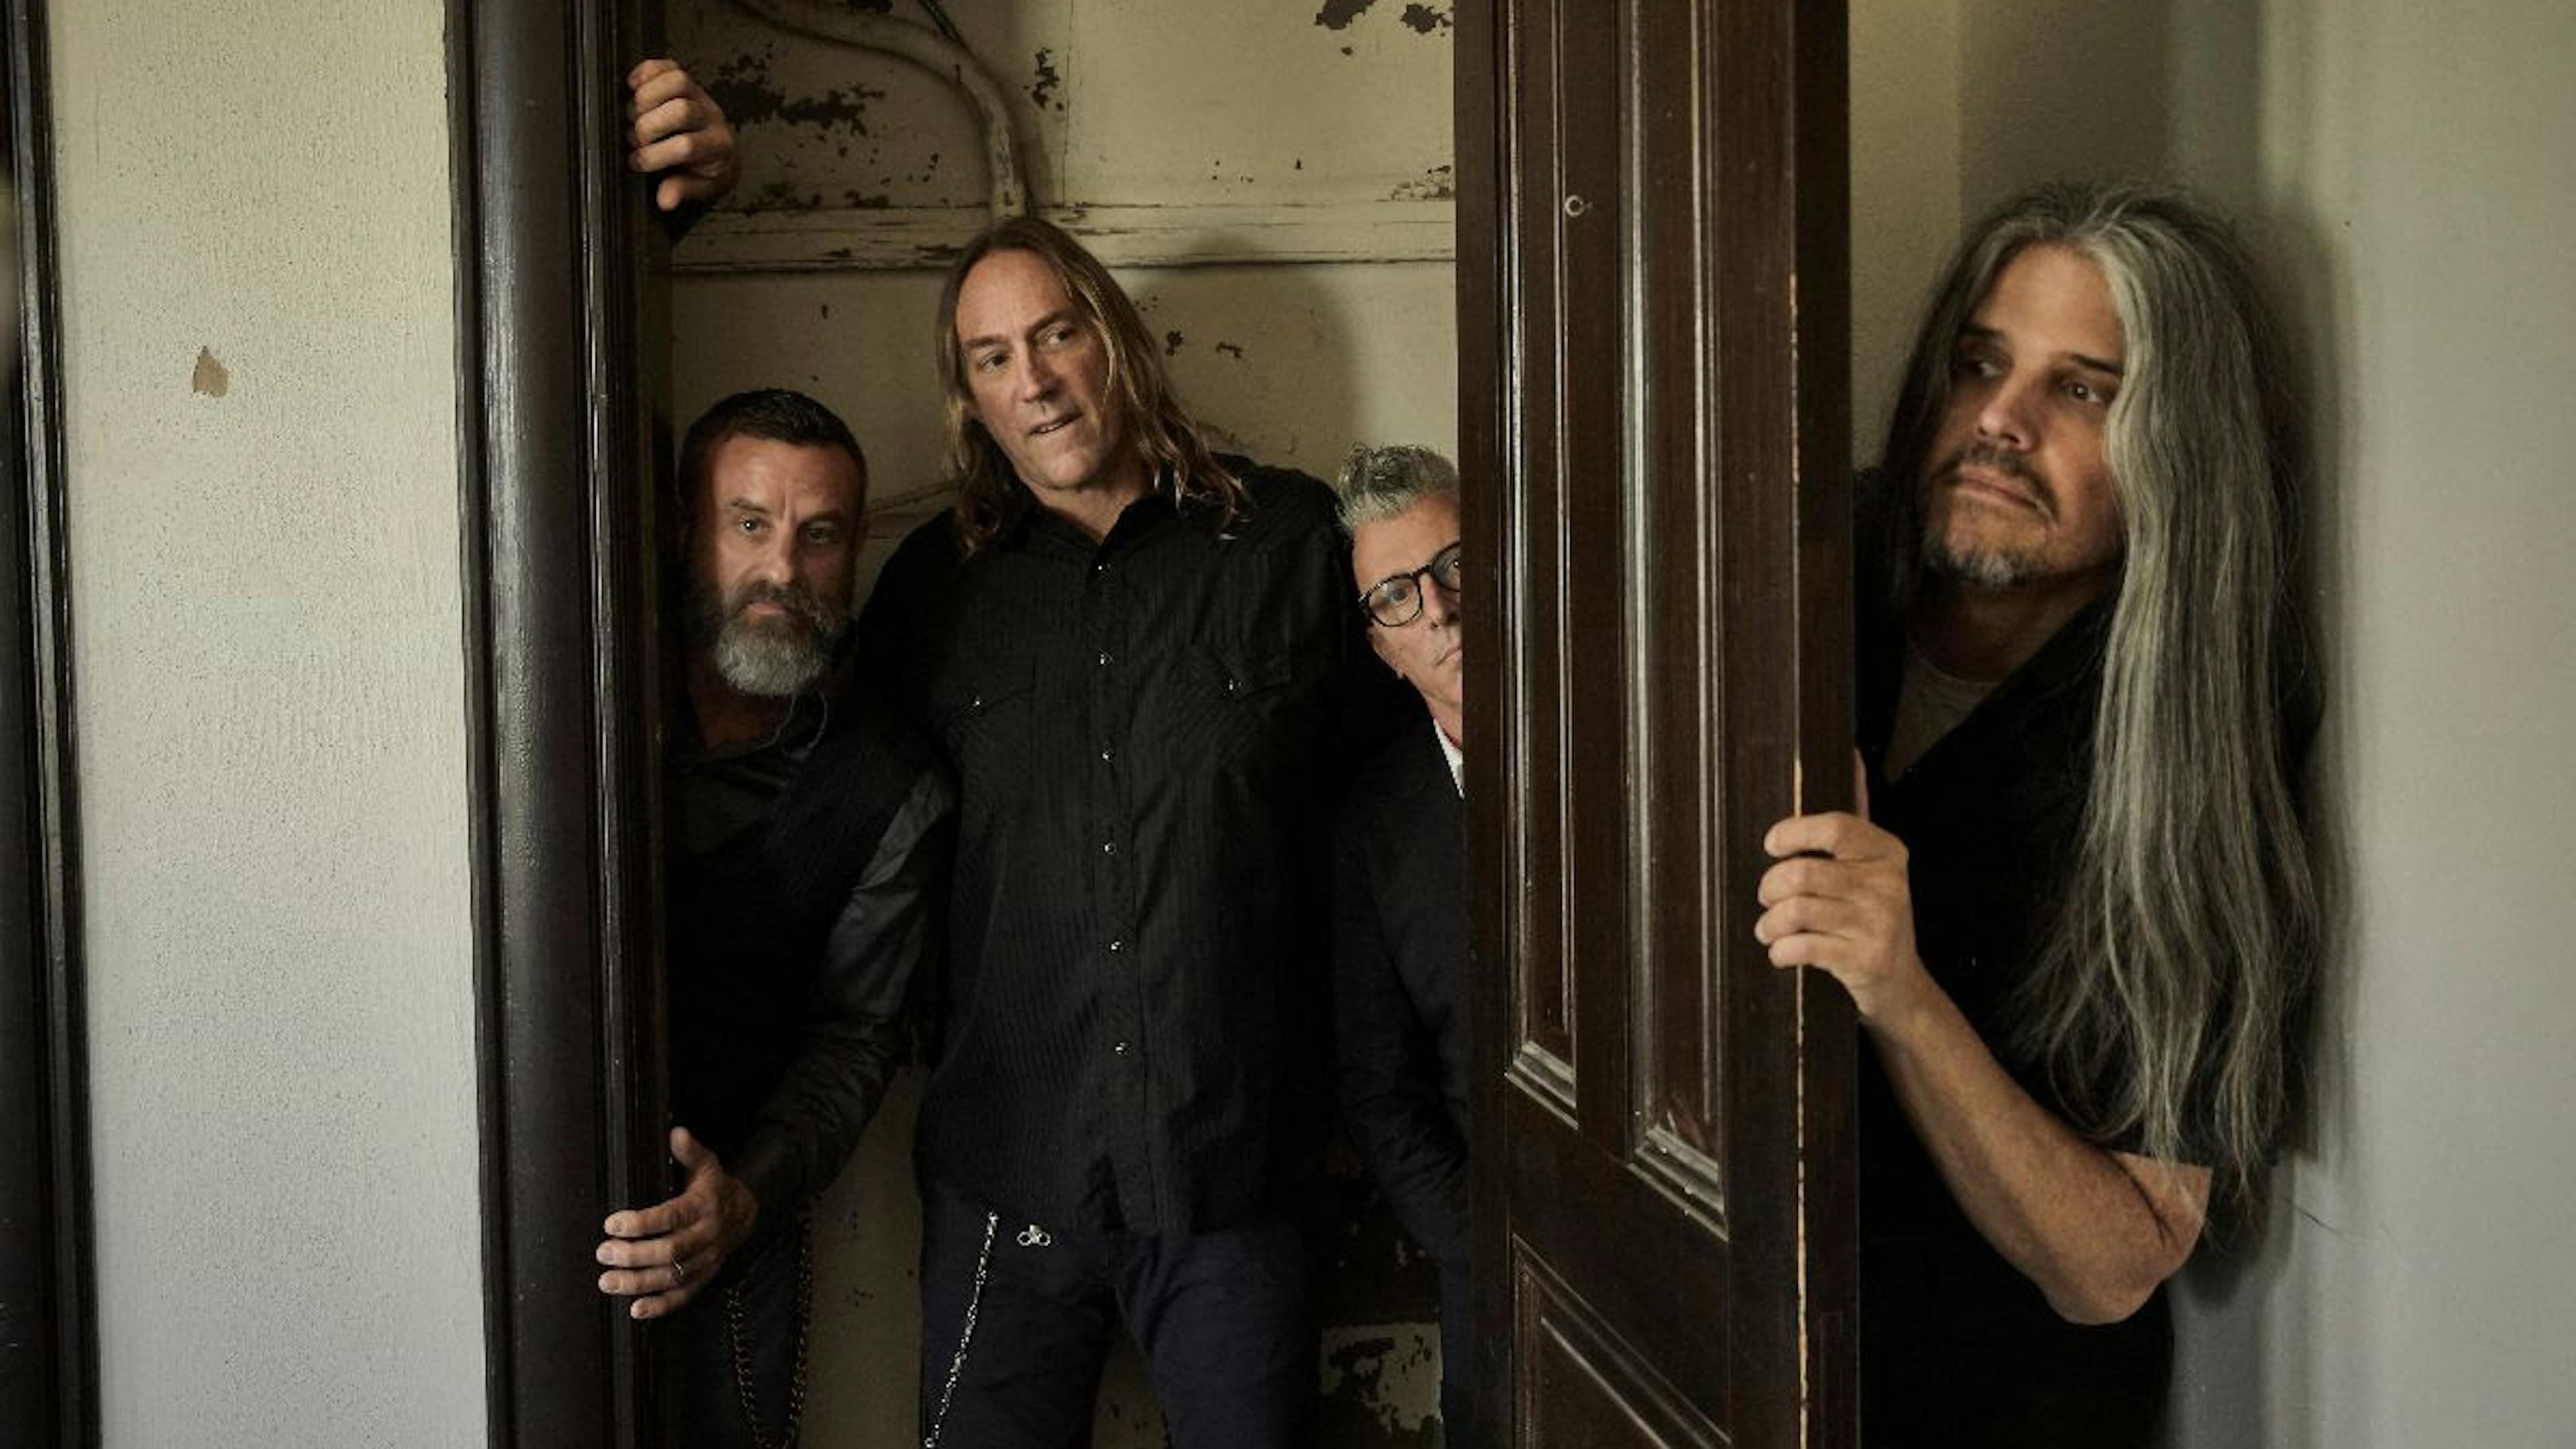 Tool have announced a North American headline tour